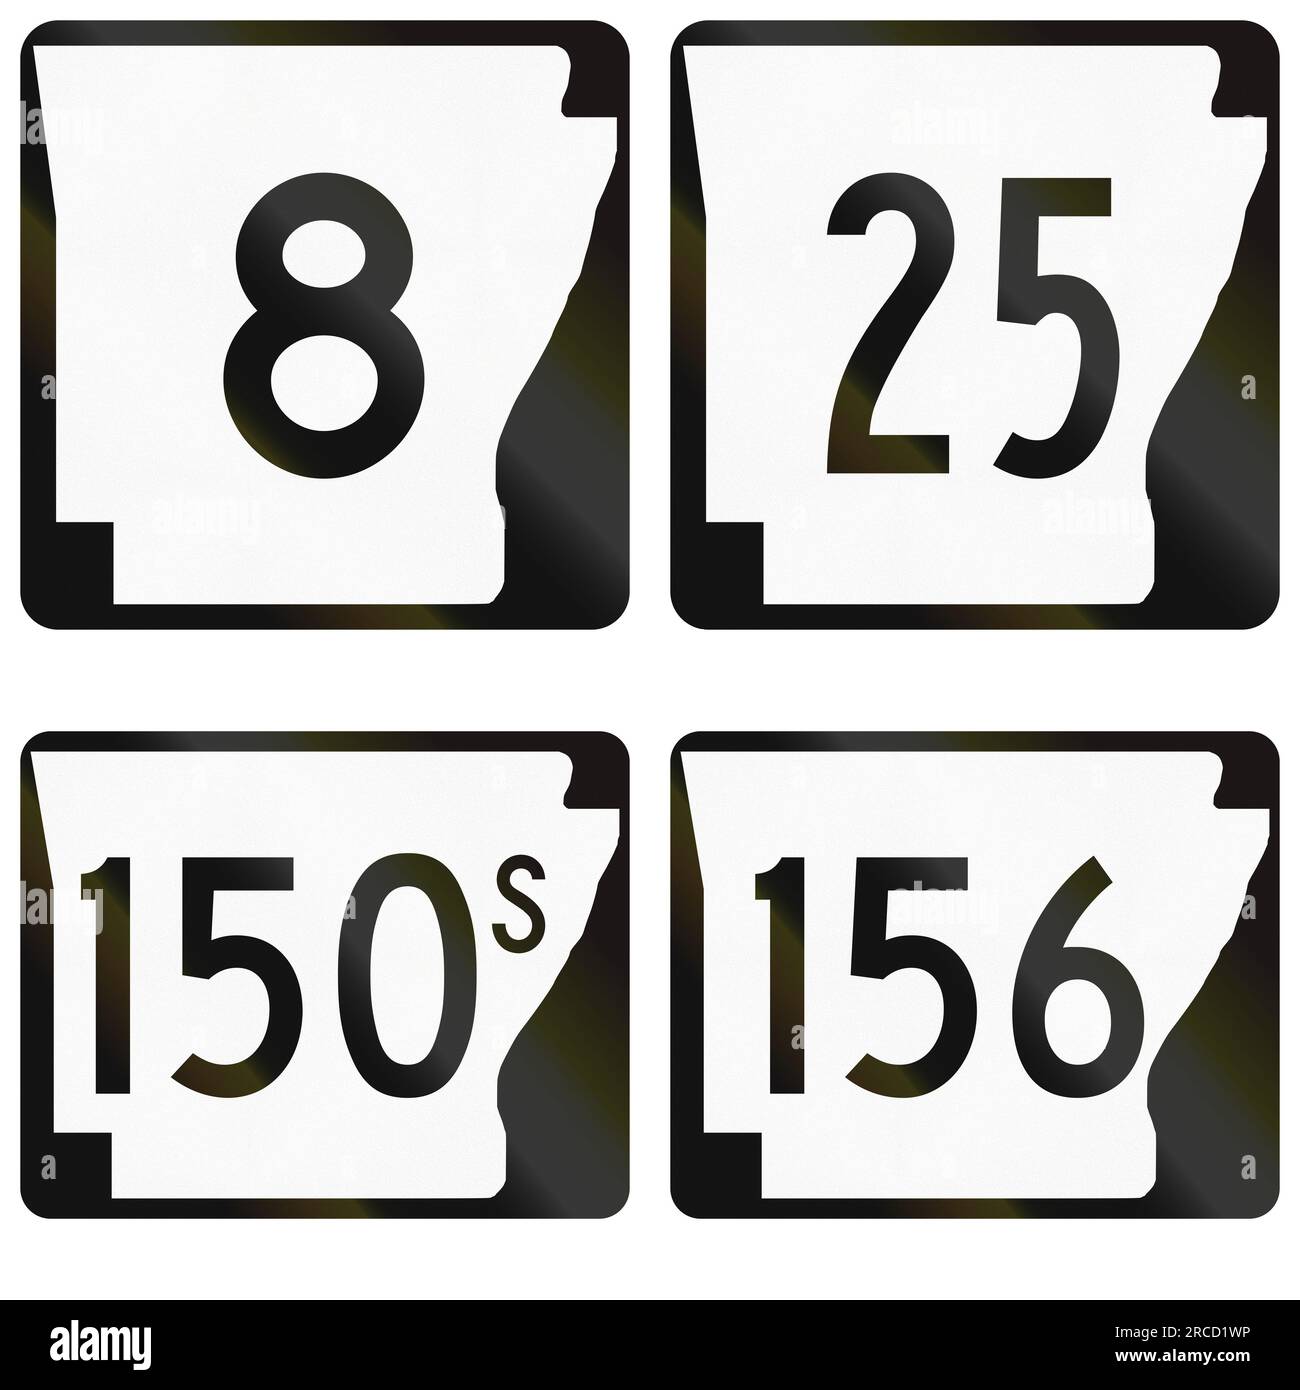 Collection of numbered road signs used in Arkansas, USA. Stock Photo